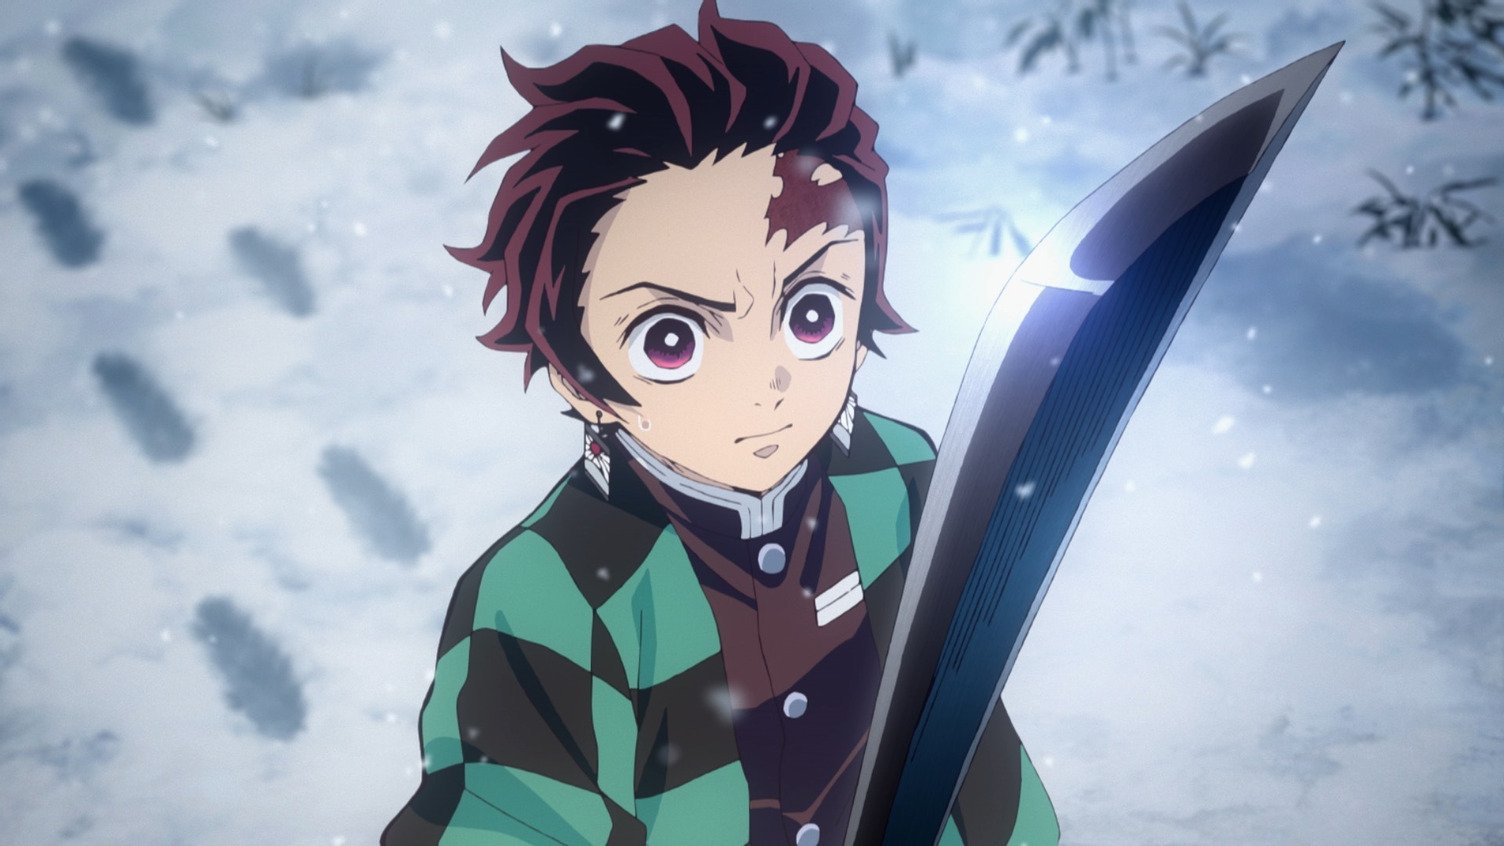 Tanjiro standing in the snow and holding a sword in 'Demon Slayer' after all the characters have been put to sleep by a demon.